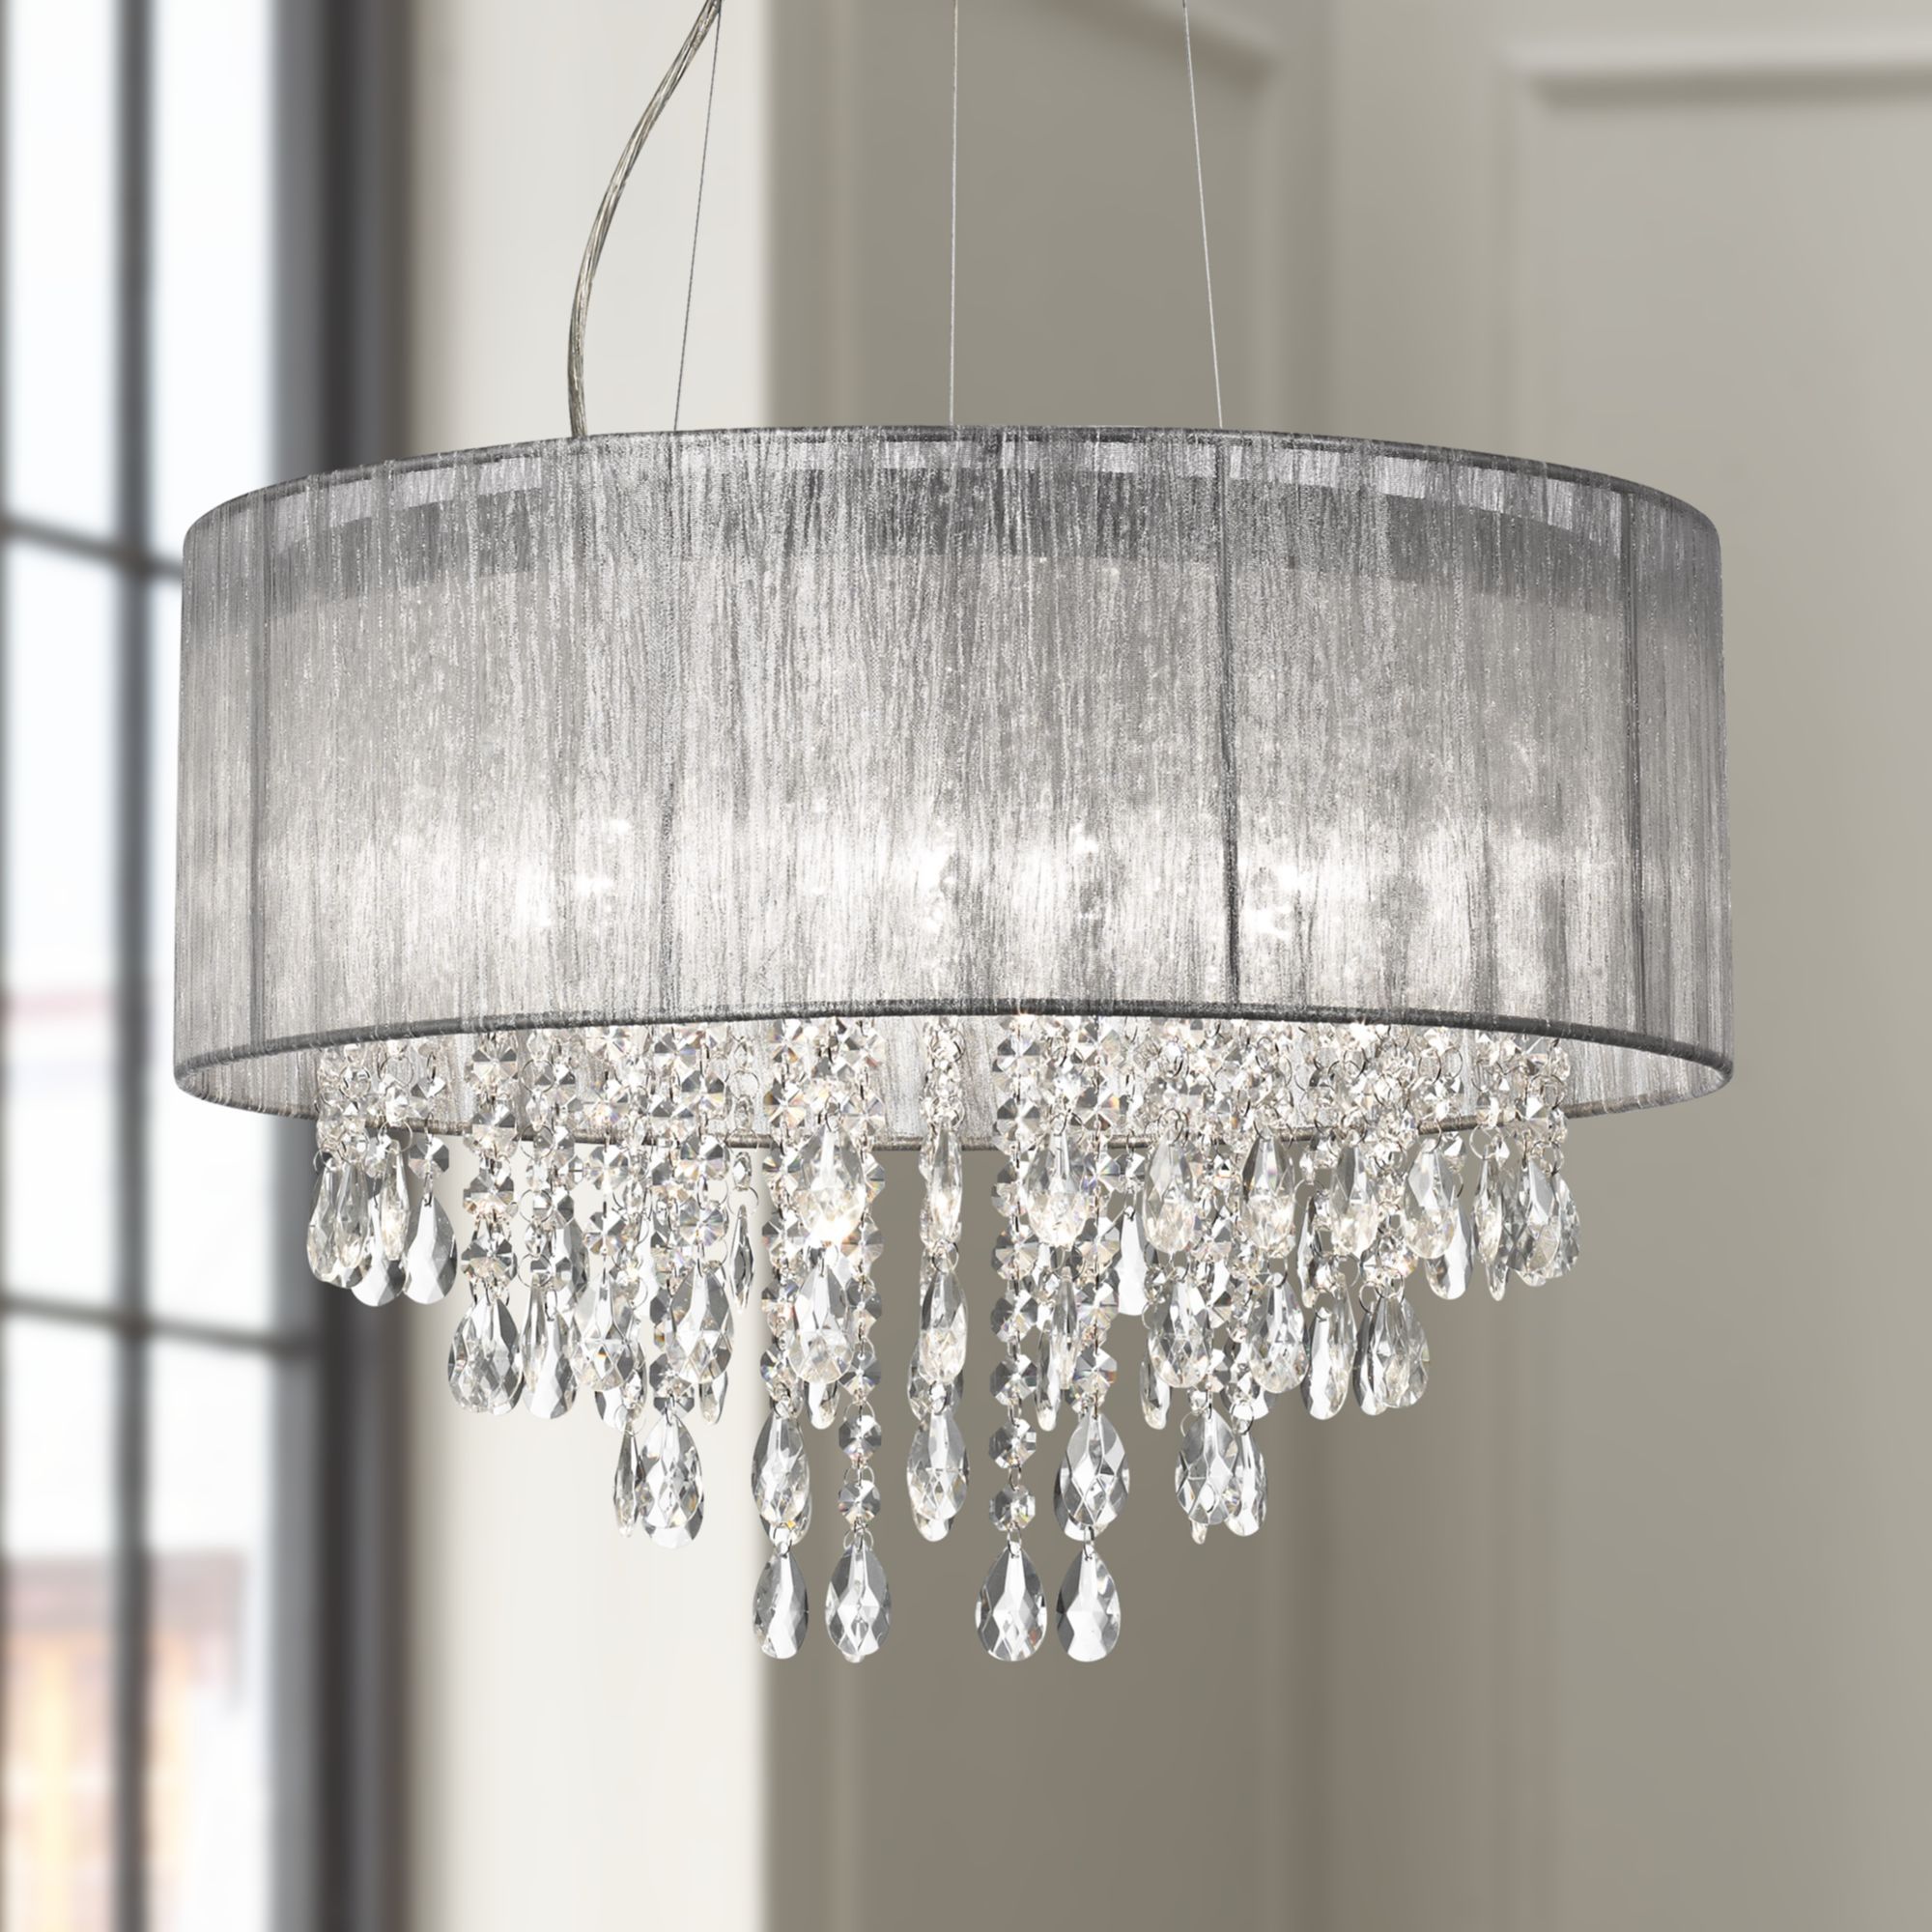 Possini Euro Design Chrome Drum Chandelier 20" Wide Modern For Chrome And Crystal Led Chandeliers (View 4 of 15)